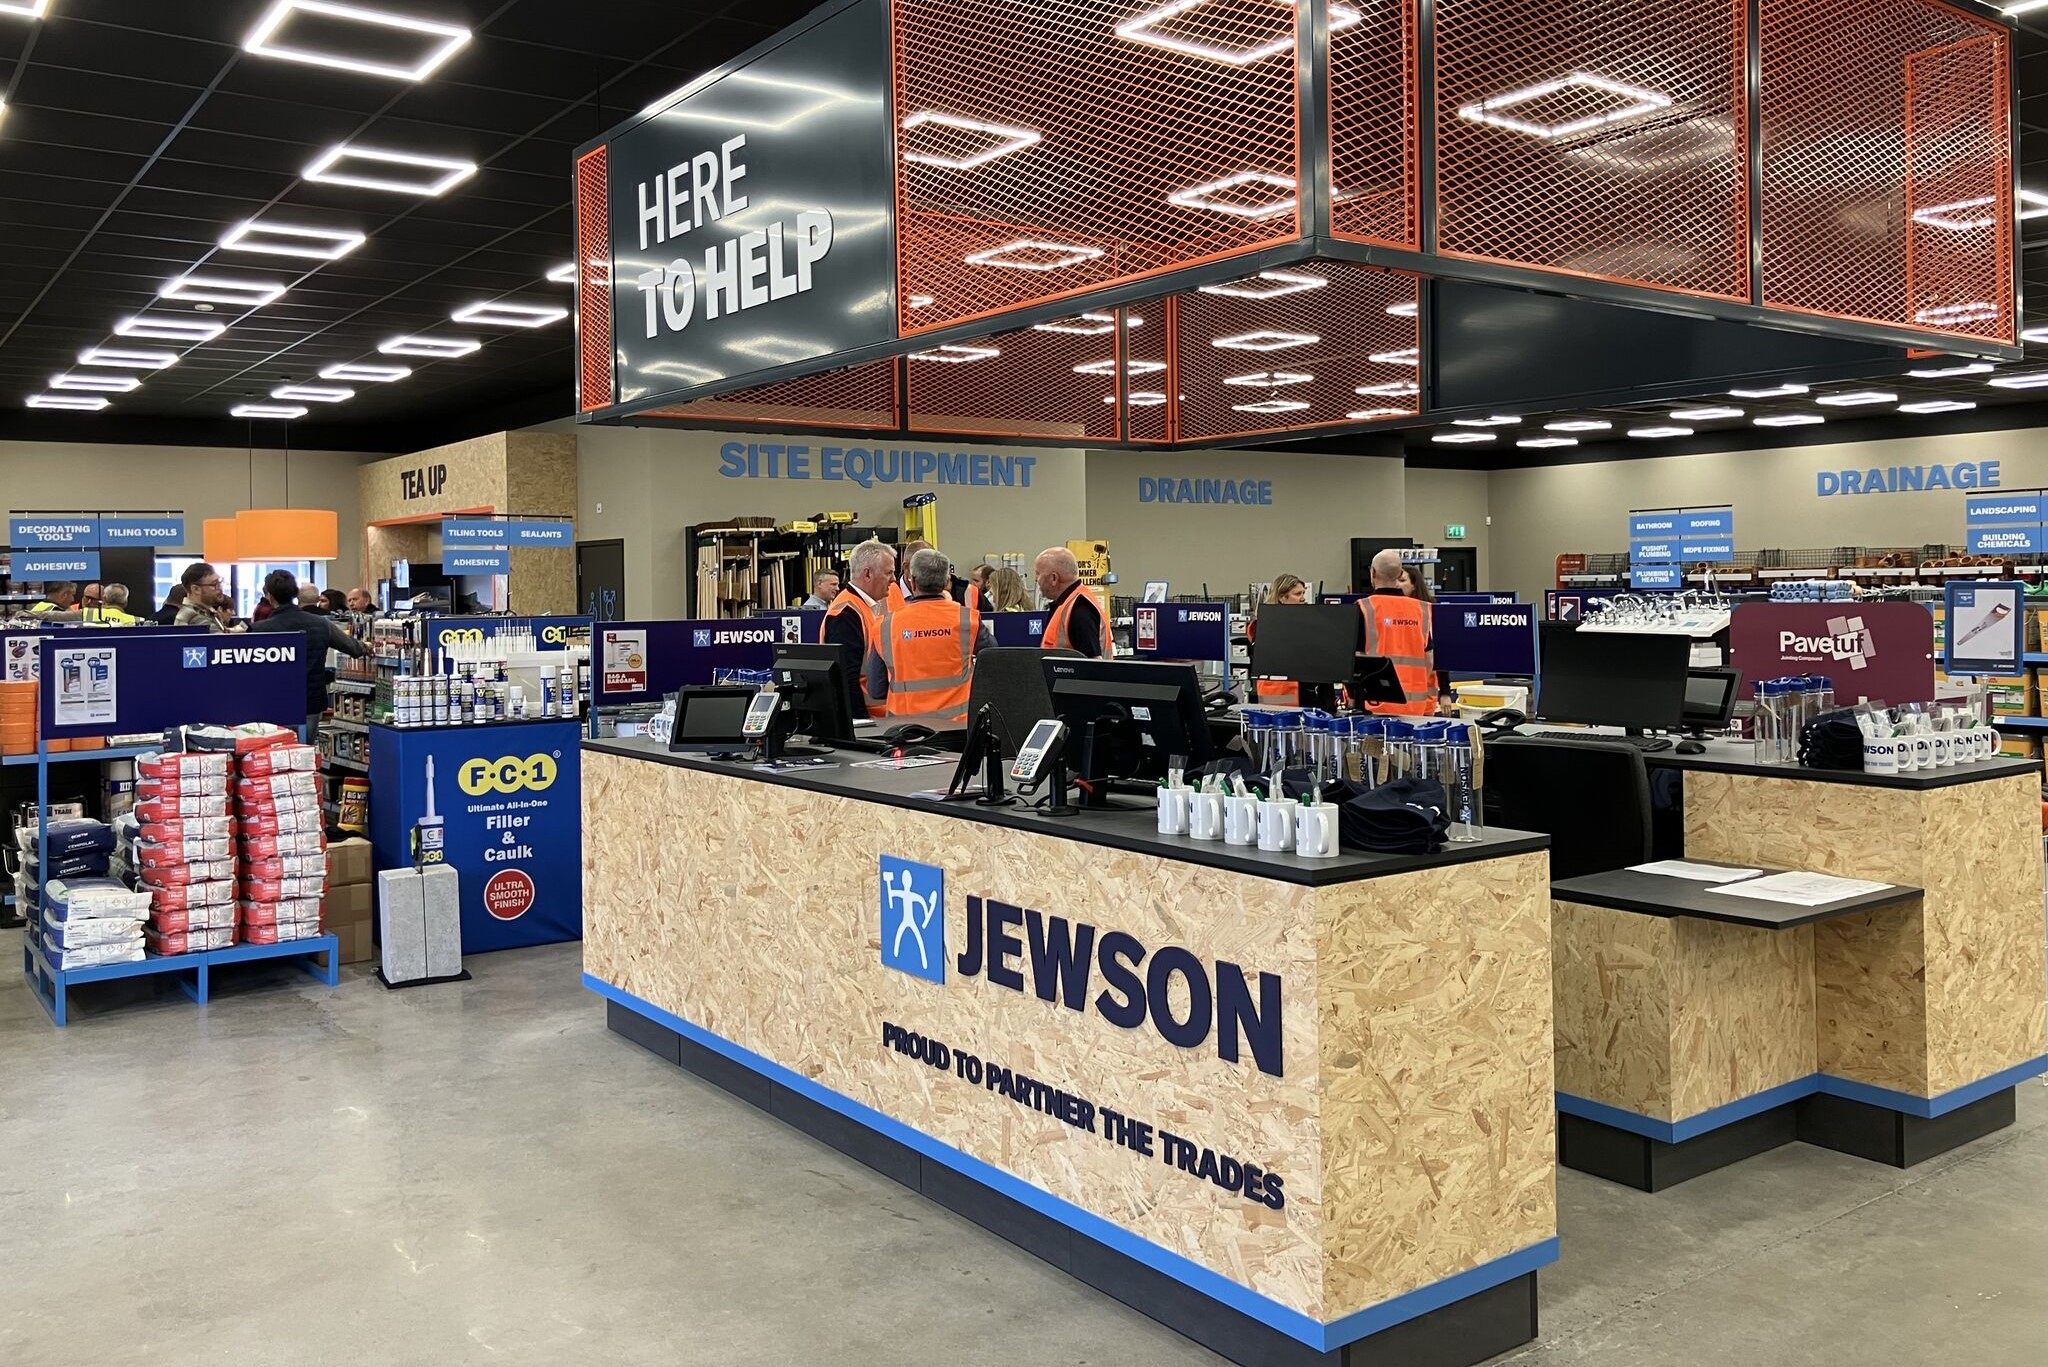 Jewson has opened the doors to its newly refurbished branch at Bridgwater, which becomes the first to feature its ‘Branch of the Future’ concept.